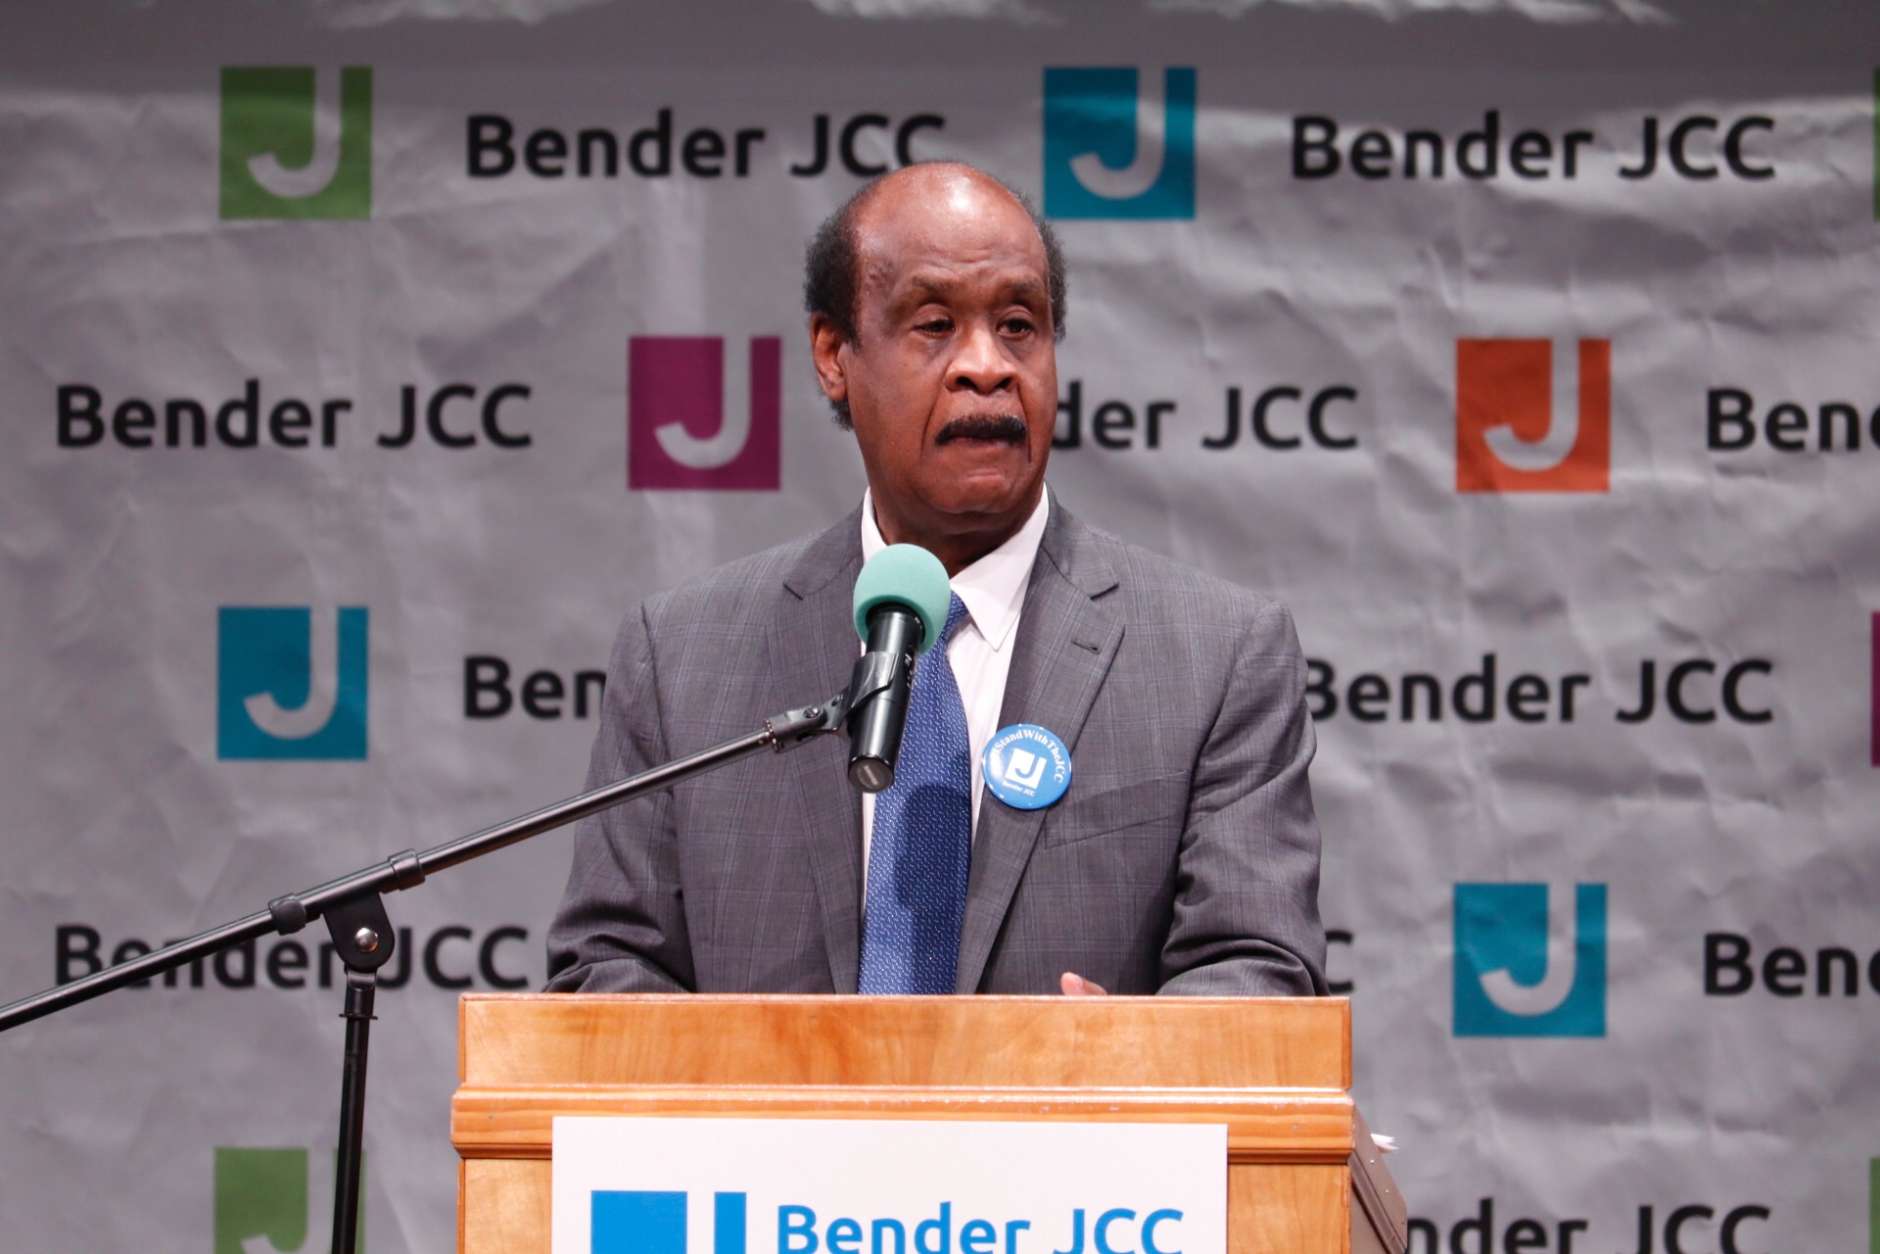 In this WTOP fle photo, Montgomery County Executive Ike Leggett speaks at a Jewish Community Relations Council of Greater Washington solidarity event on March 9, 2017. (WTOP/Kate Ryan)